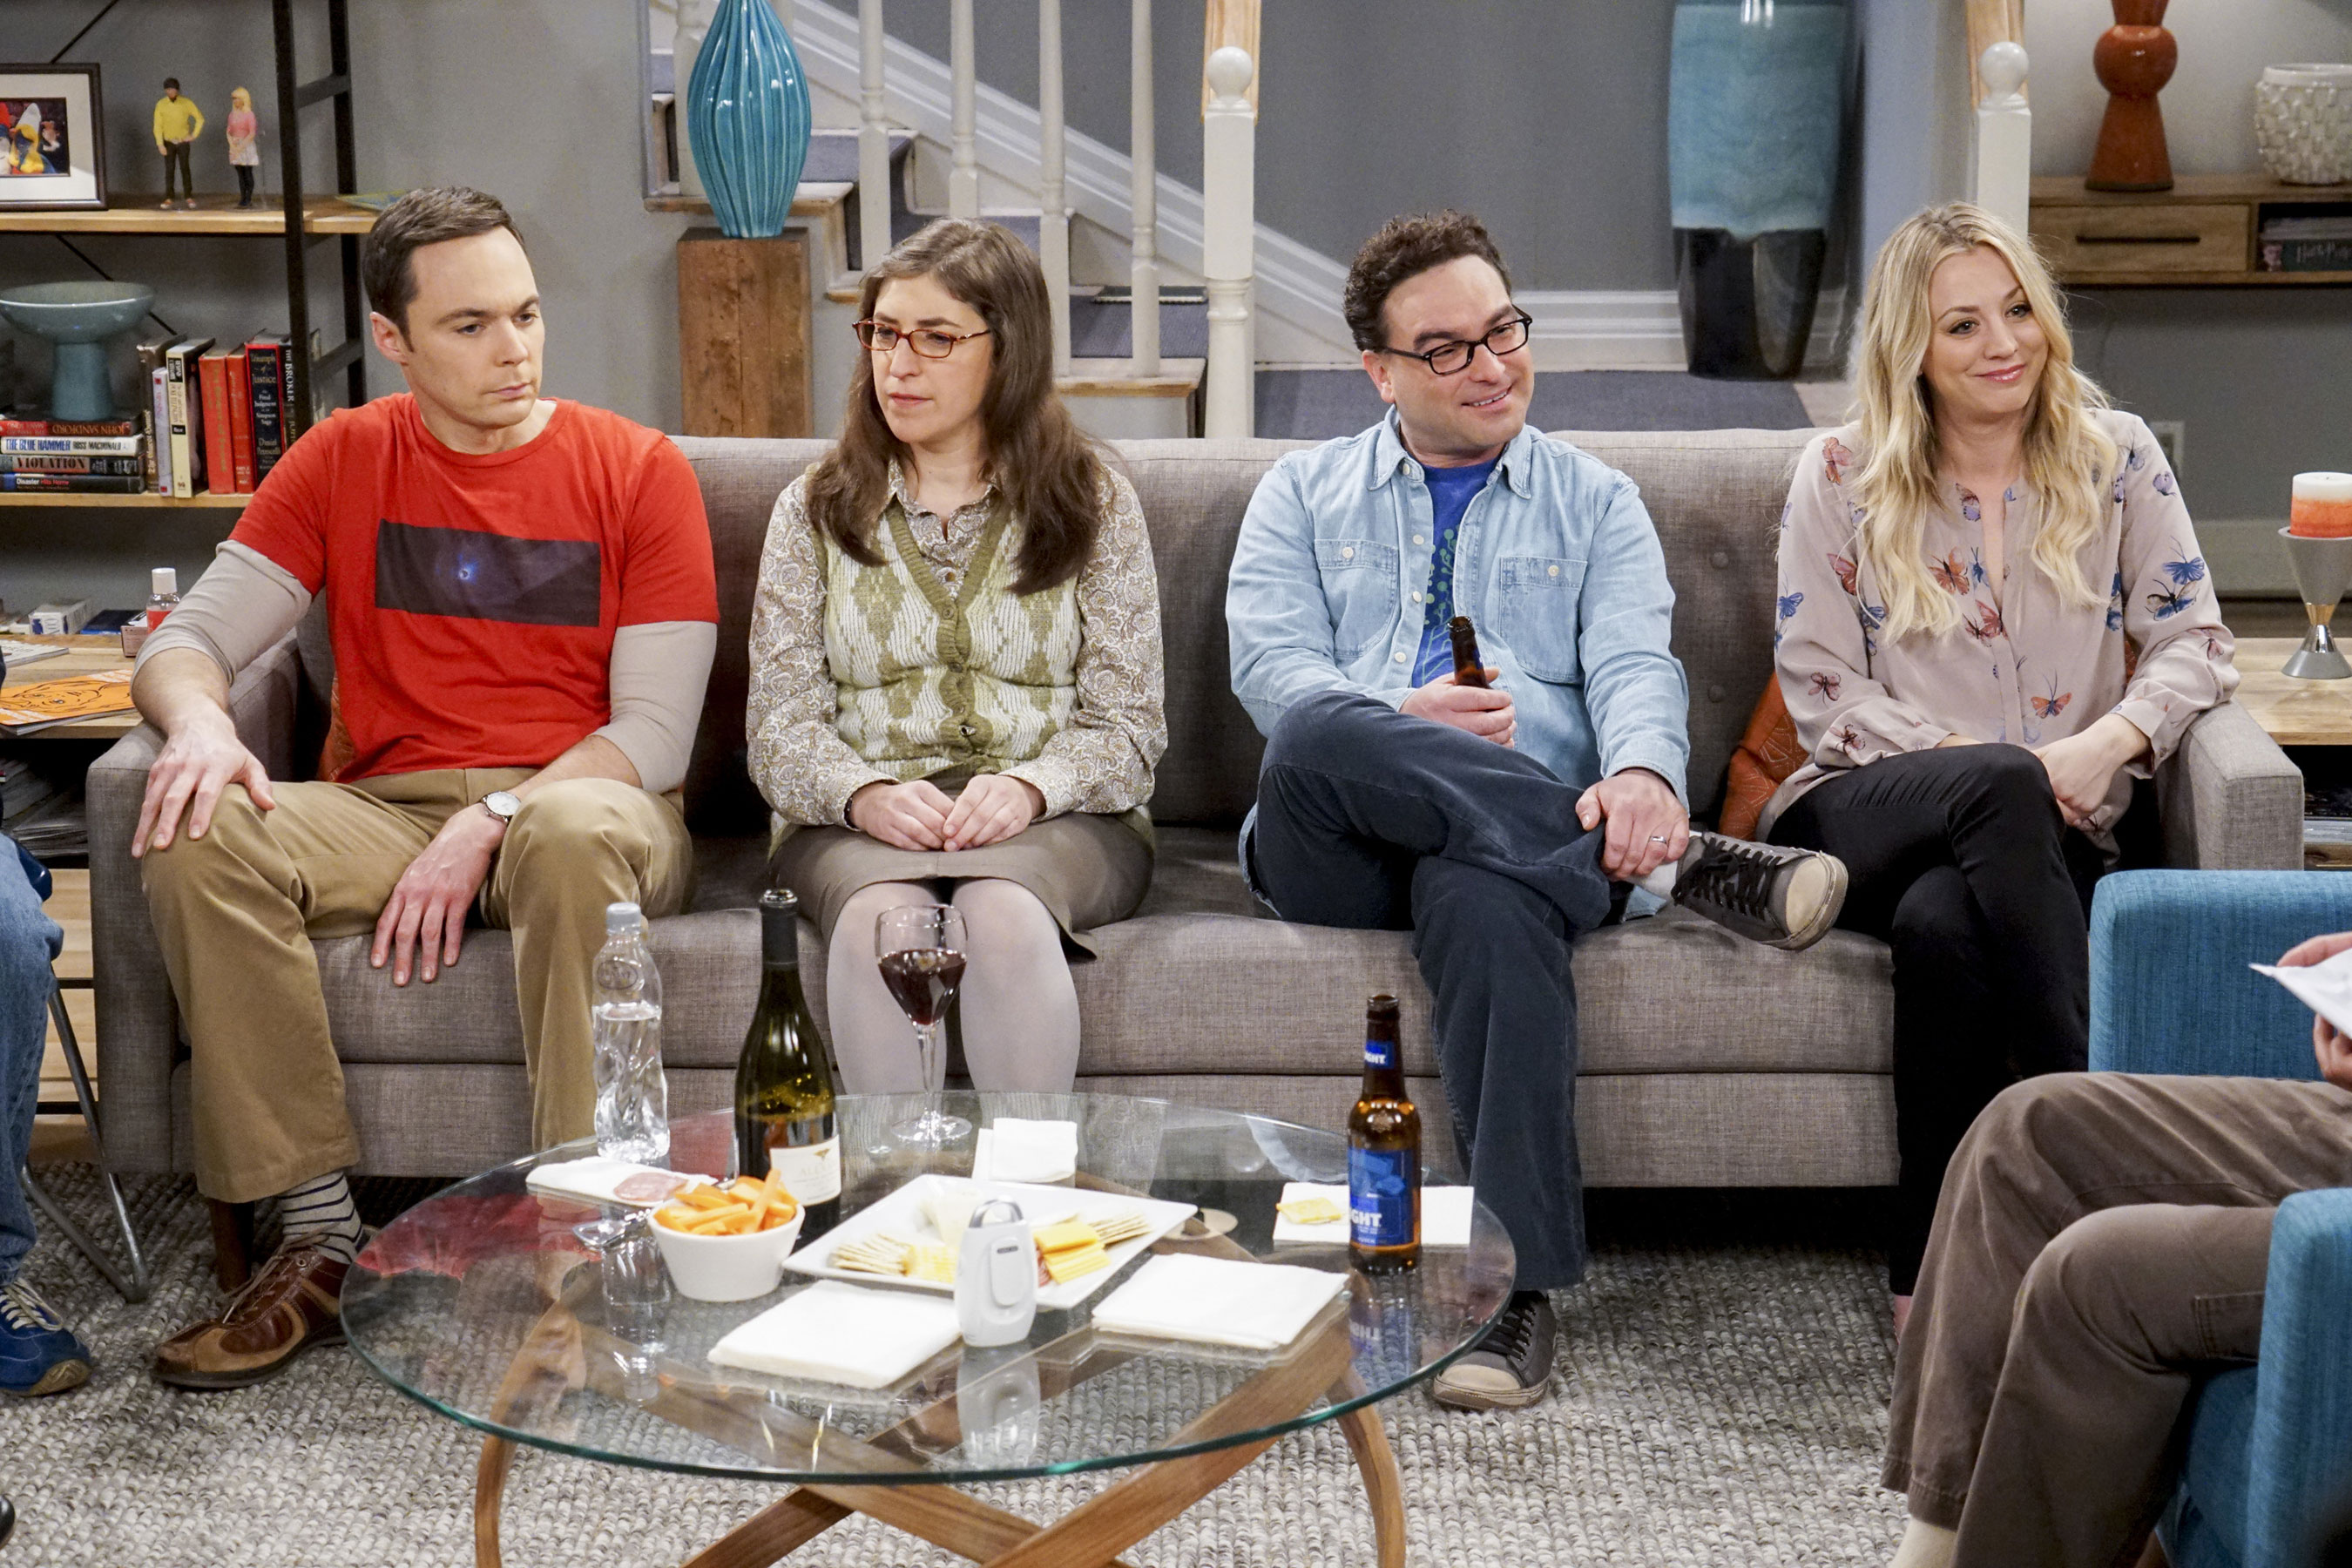 "The Comic-Con Conundrum" -- Pictured: Sheldon Cooper (Jim Parsons), Amy Farrah Fowler (Mayim Bialik), Leonard Hofstadter (Johnny Galecki) and Penny (Kaley Cuoco). Leonard reluctantly agrees to let Penny join the gang for their annual trip to Comic-Con next summer, on THE BIG BANG THEORY, Thursday, Feb. 23 (8:00-8:31 PM, ET/PT), on the CBS Television Network. Photo: Monty Brinton/CBS ÃÂ©2017 CBS Broadcasting, Inc. All Rights Reserved.